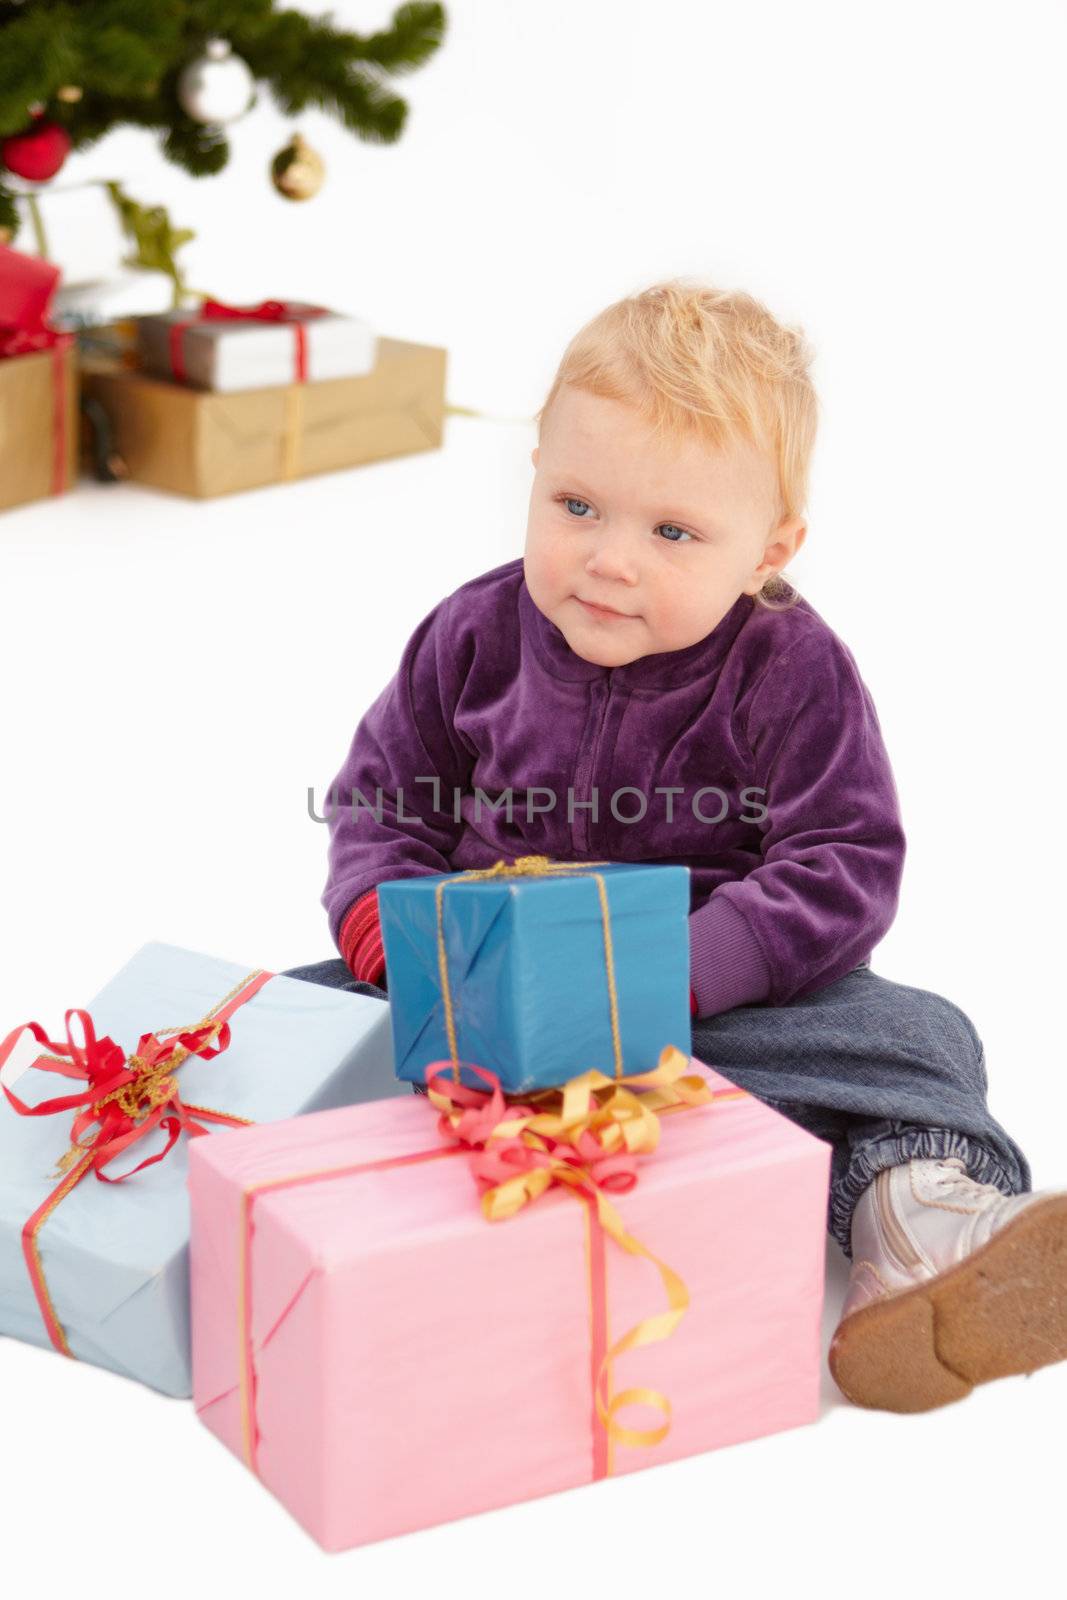 Christmas - Look at all my presents by FreedomImage